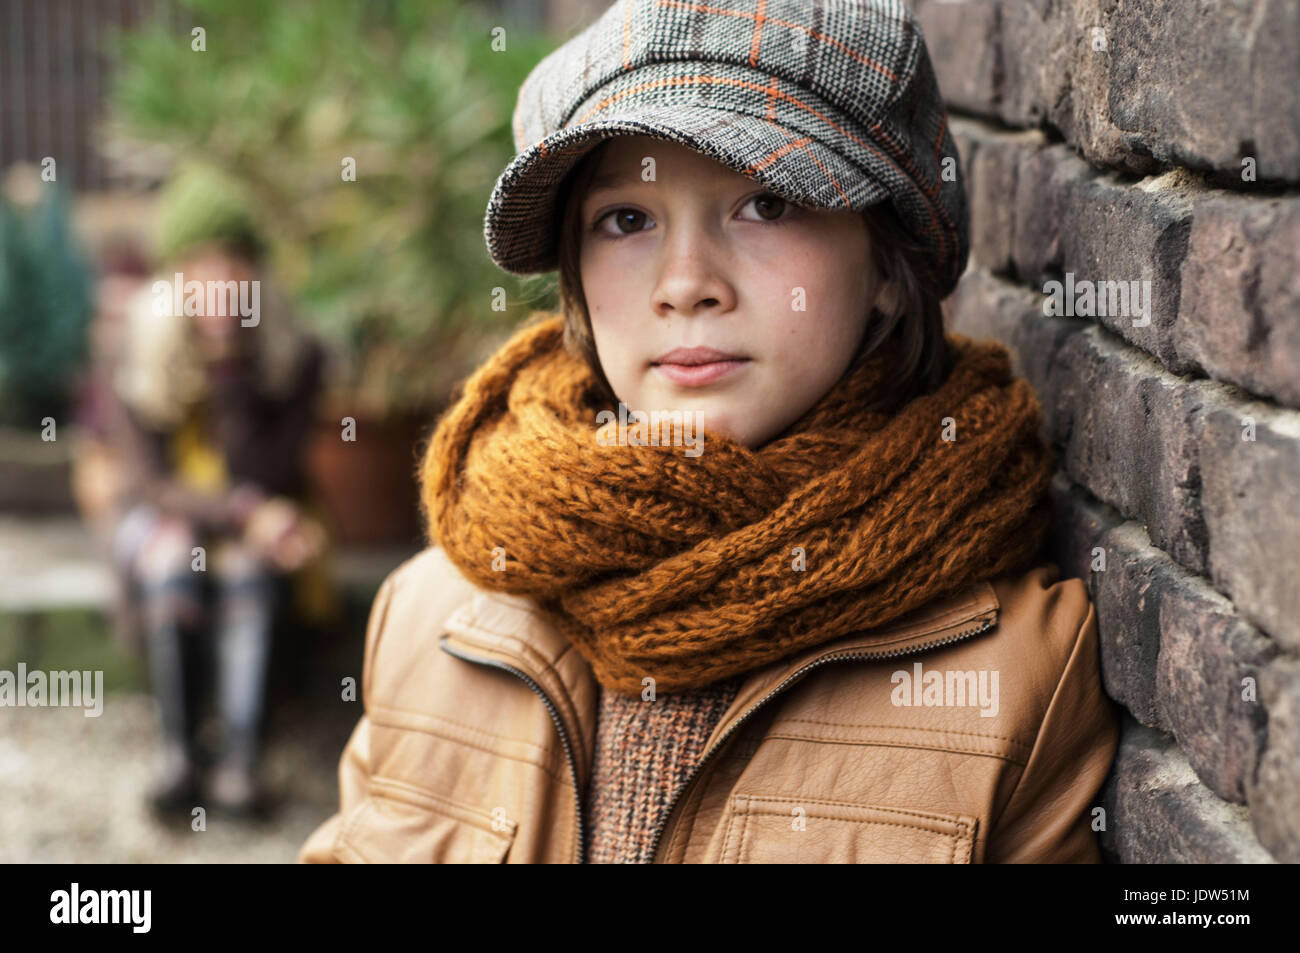 Boy wearing flat cap and scarf, portrait Stock Photo